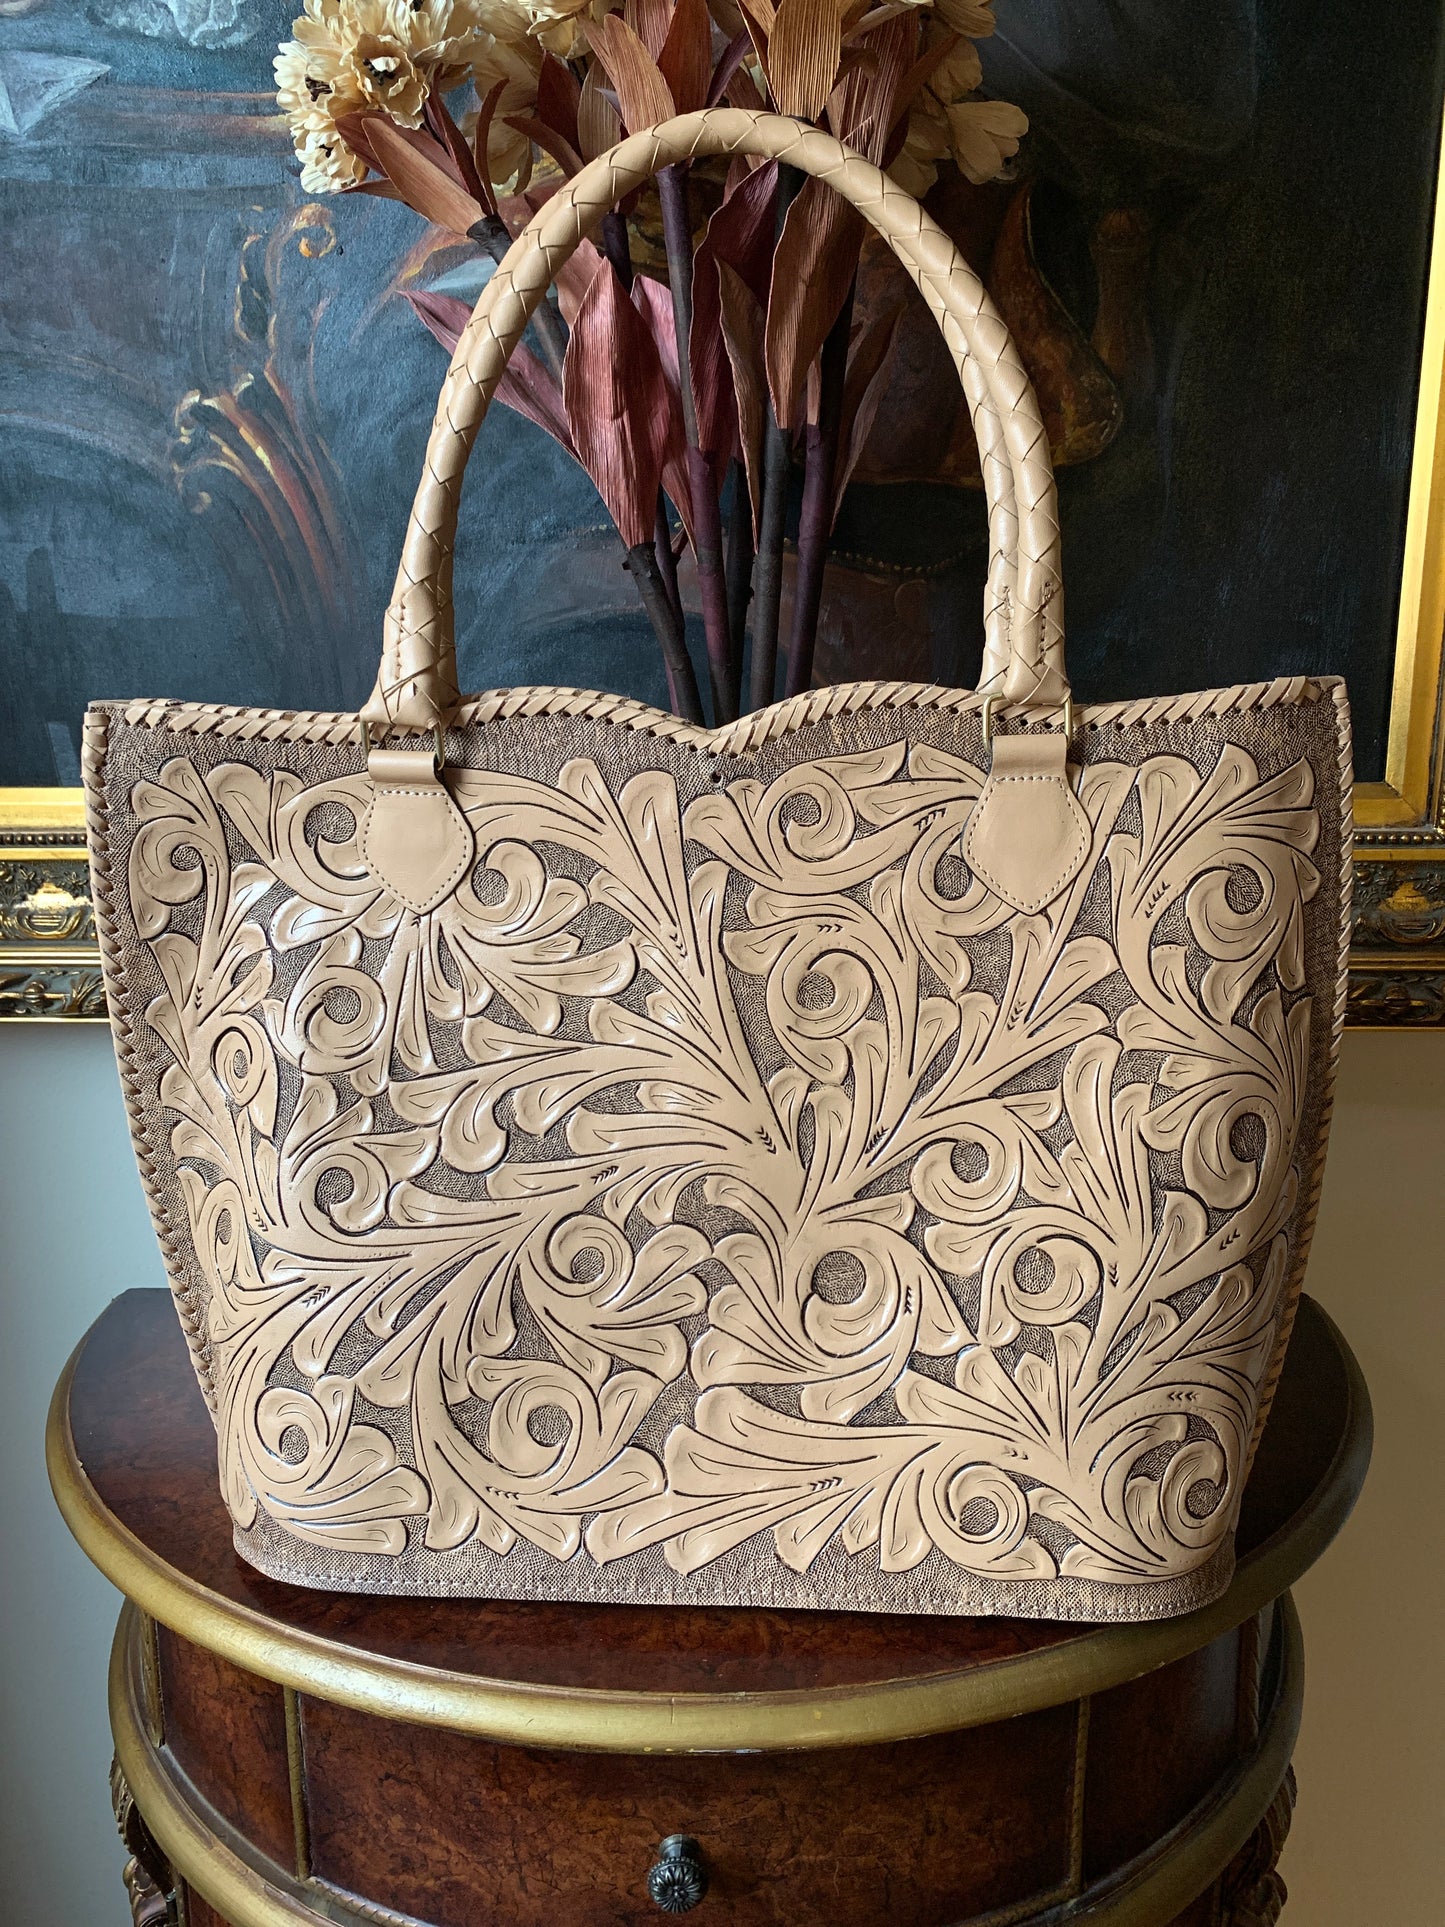 Hand Tooled Leather Tote, "Ibiza" by ALLE, Beige Color - ALLE Handbags